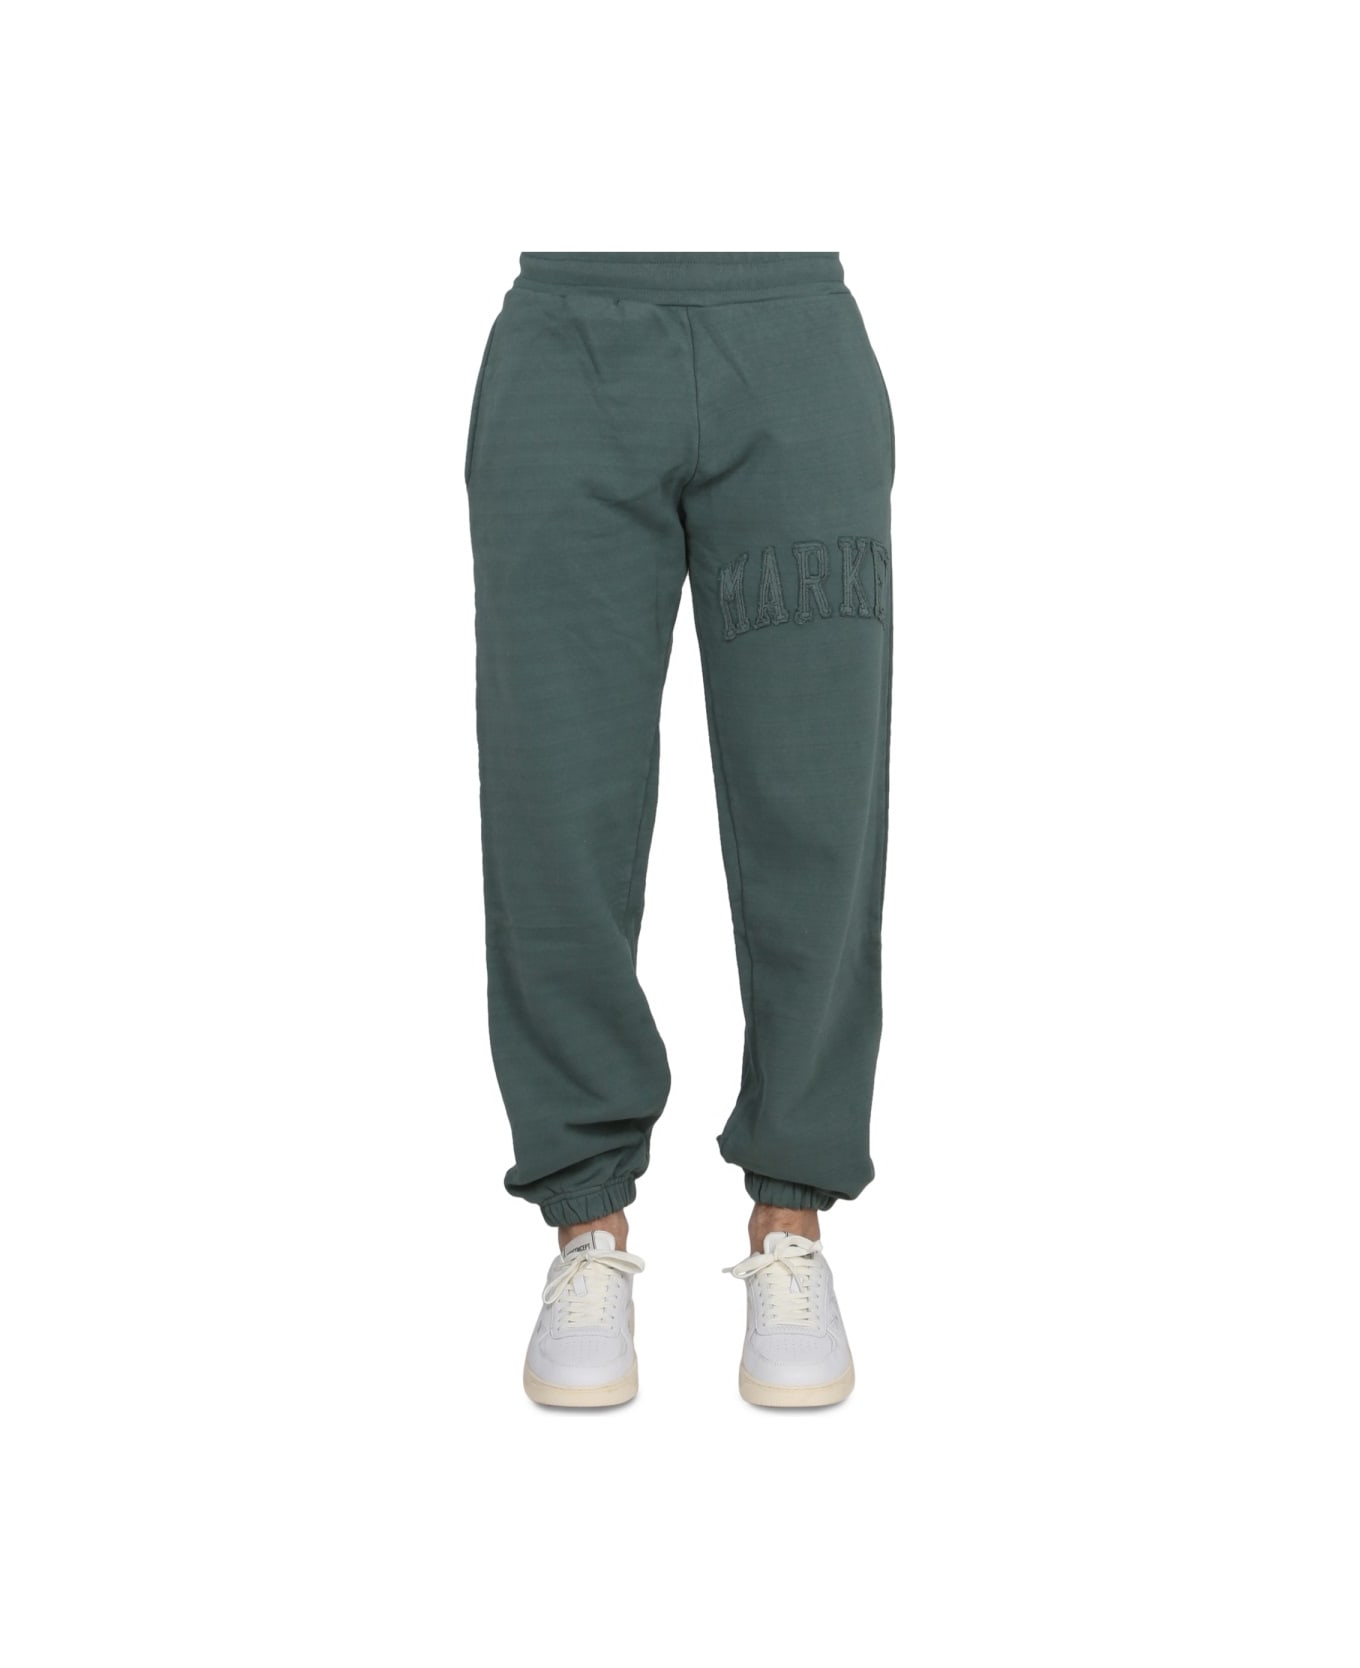 Market Pants With Applied Logo - GREEN